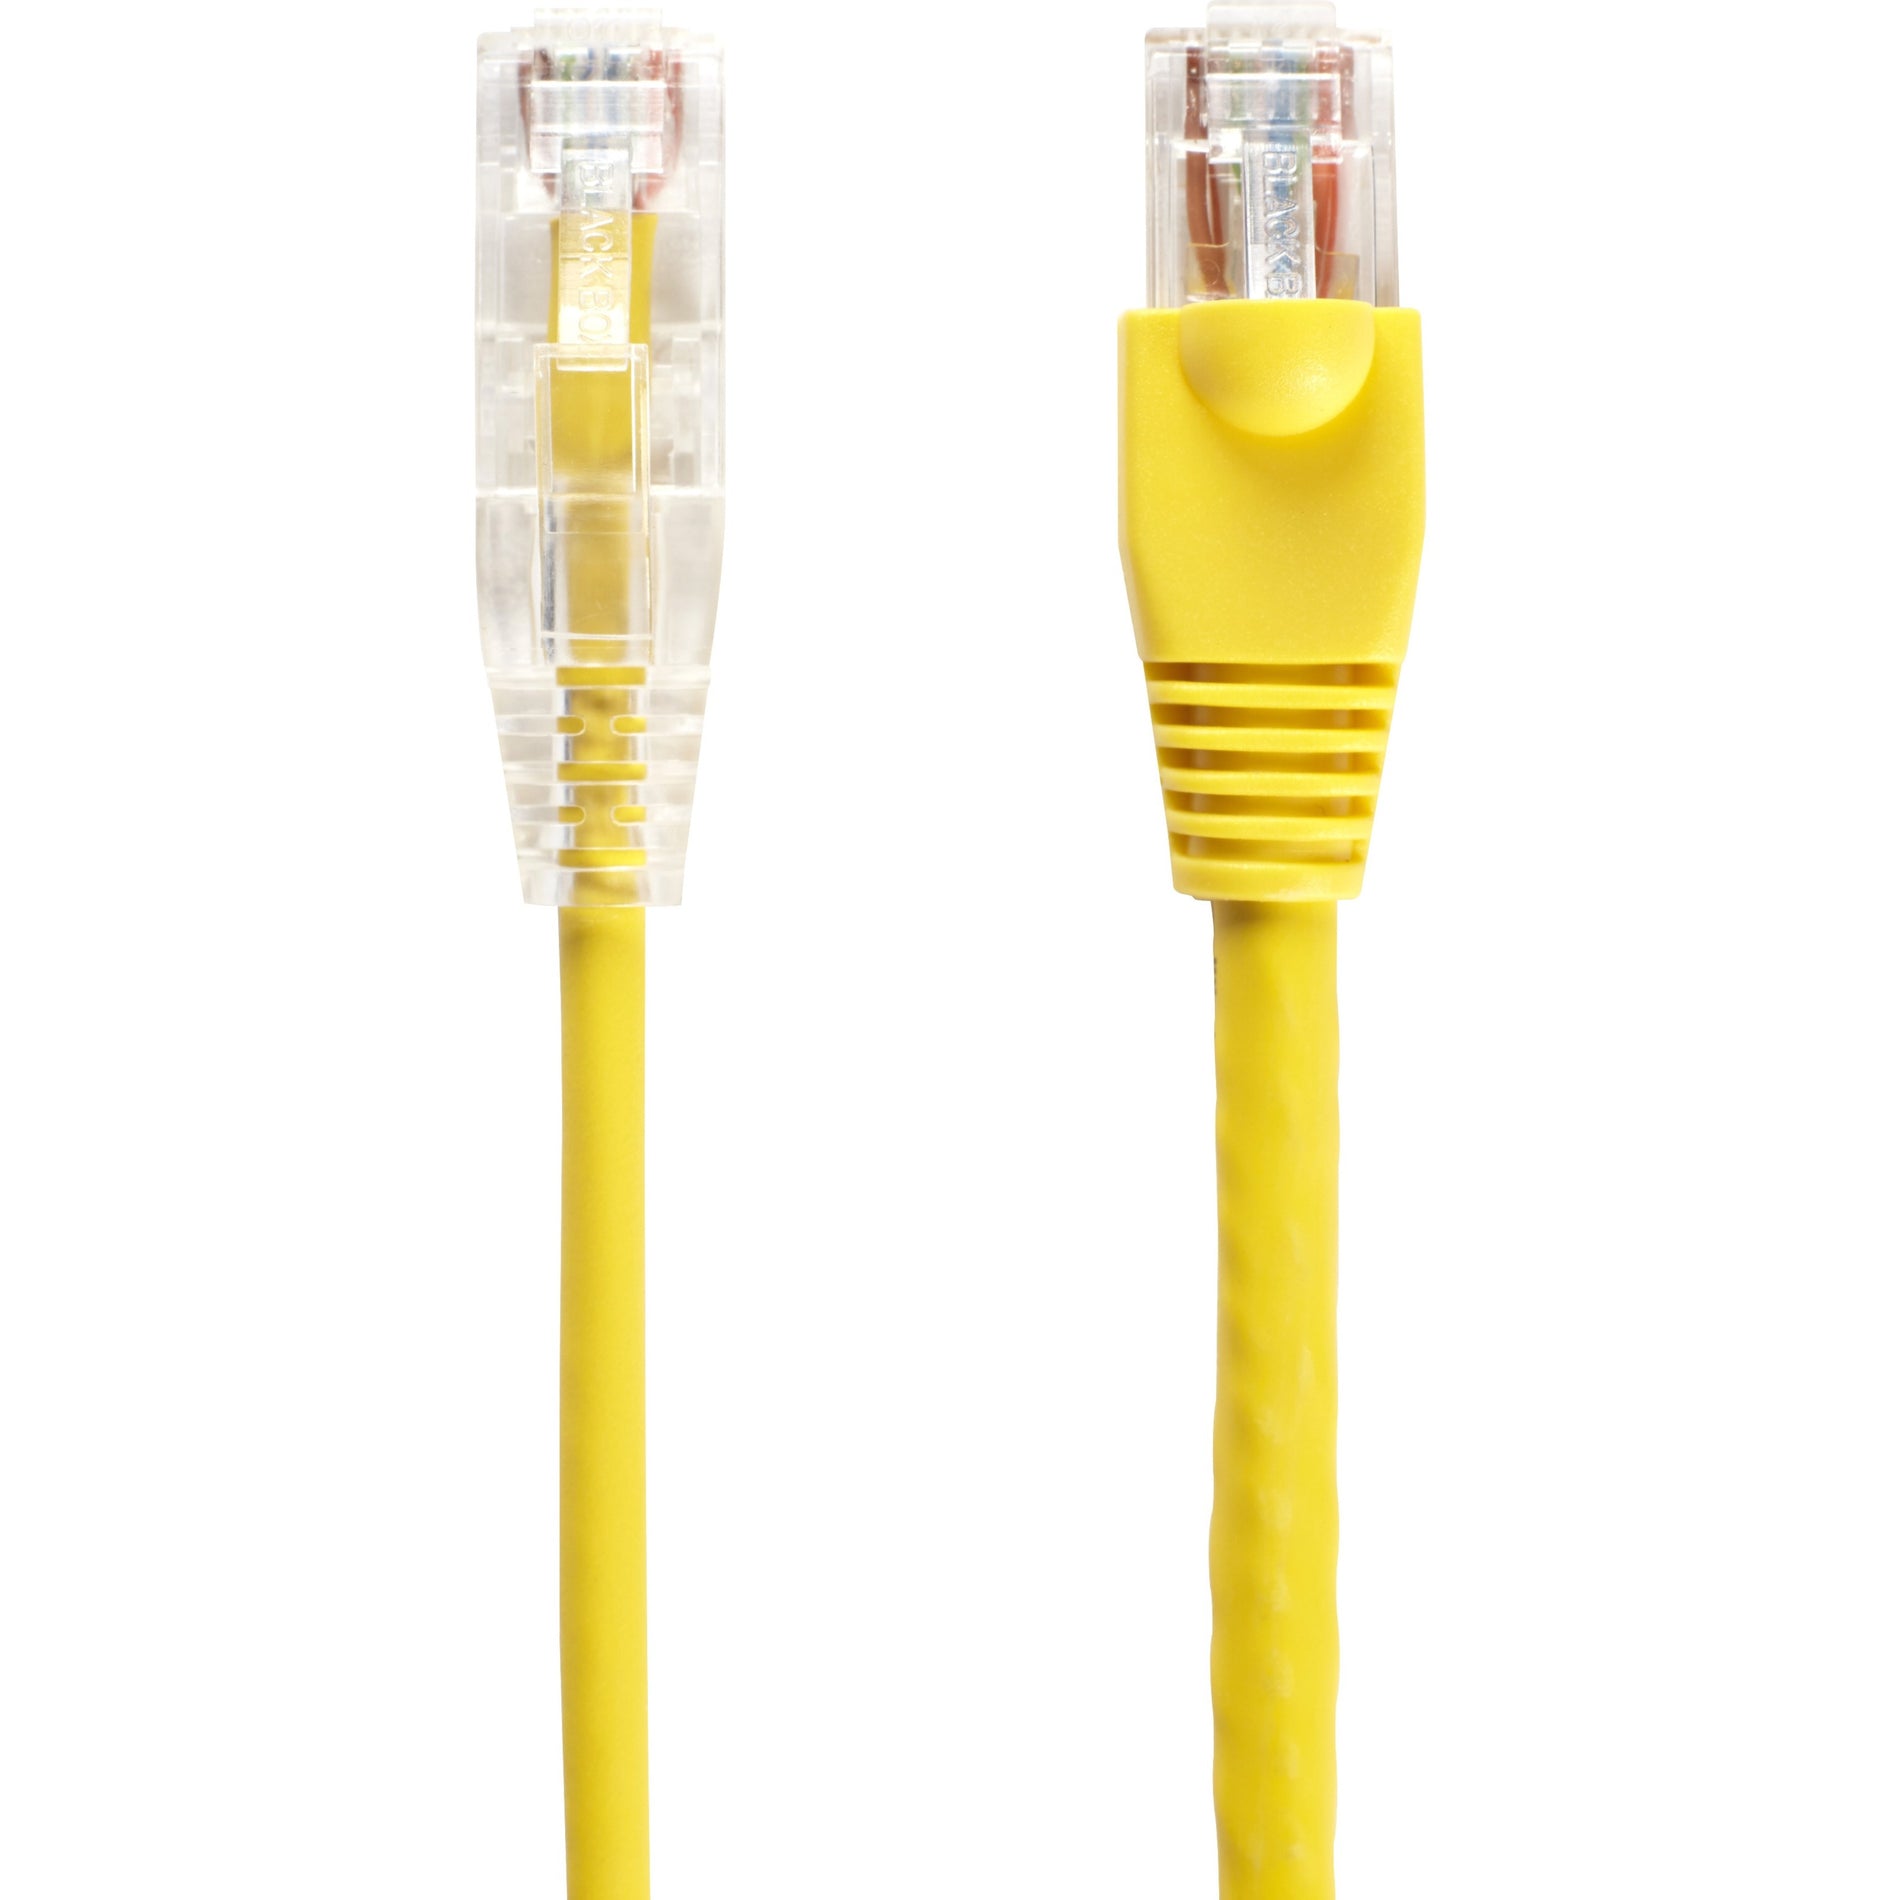 Black Box C6PC28-YL-10 Slim-Net Cat.6 UTP Patch Network Cable, 10 ft, Snagless Boot, 10 Gbit/s Data Transfer Rate, Yellow